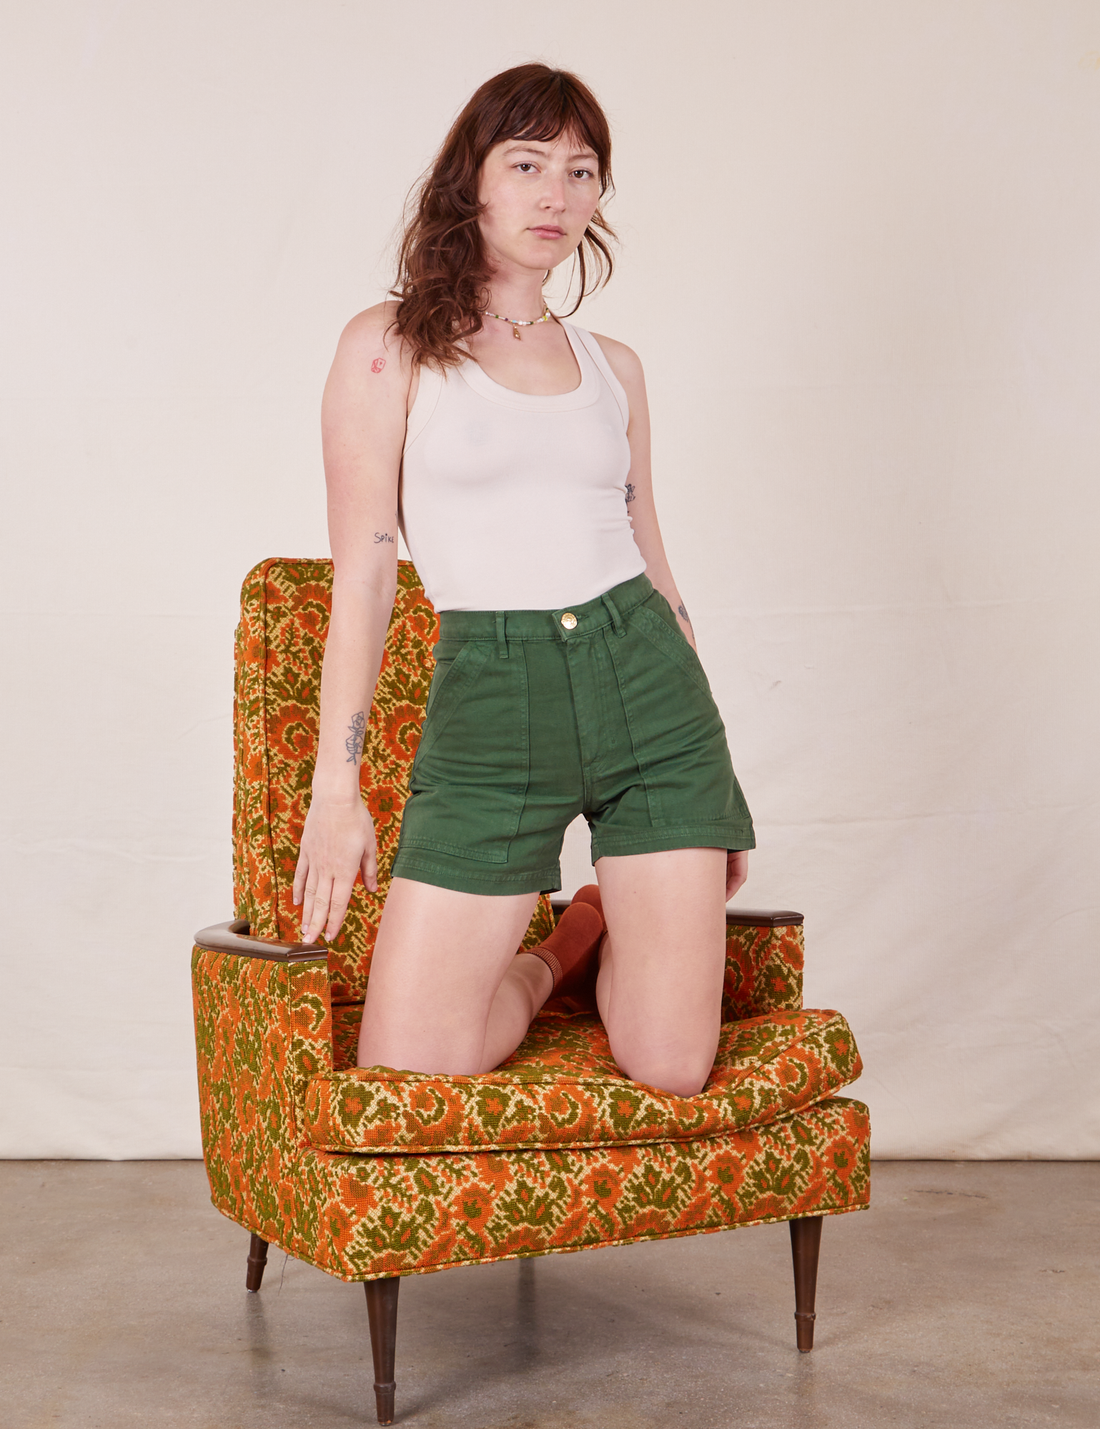 Alex is kneeling on a vintage floral upholstered chair wearing Classic Work Shorts in Dark Emerald Green and a vintage off-white Tank Top